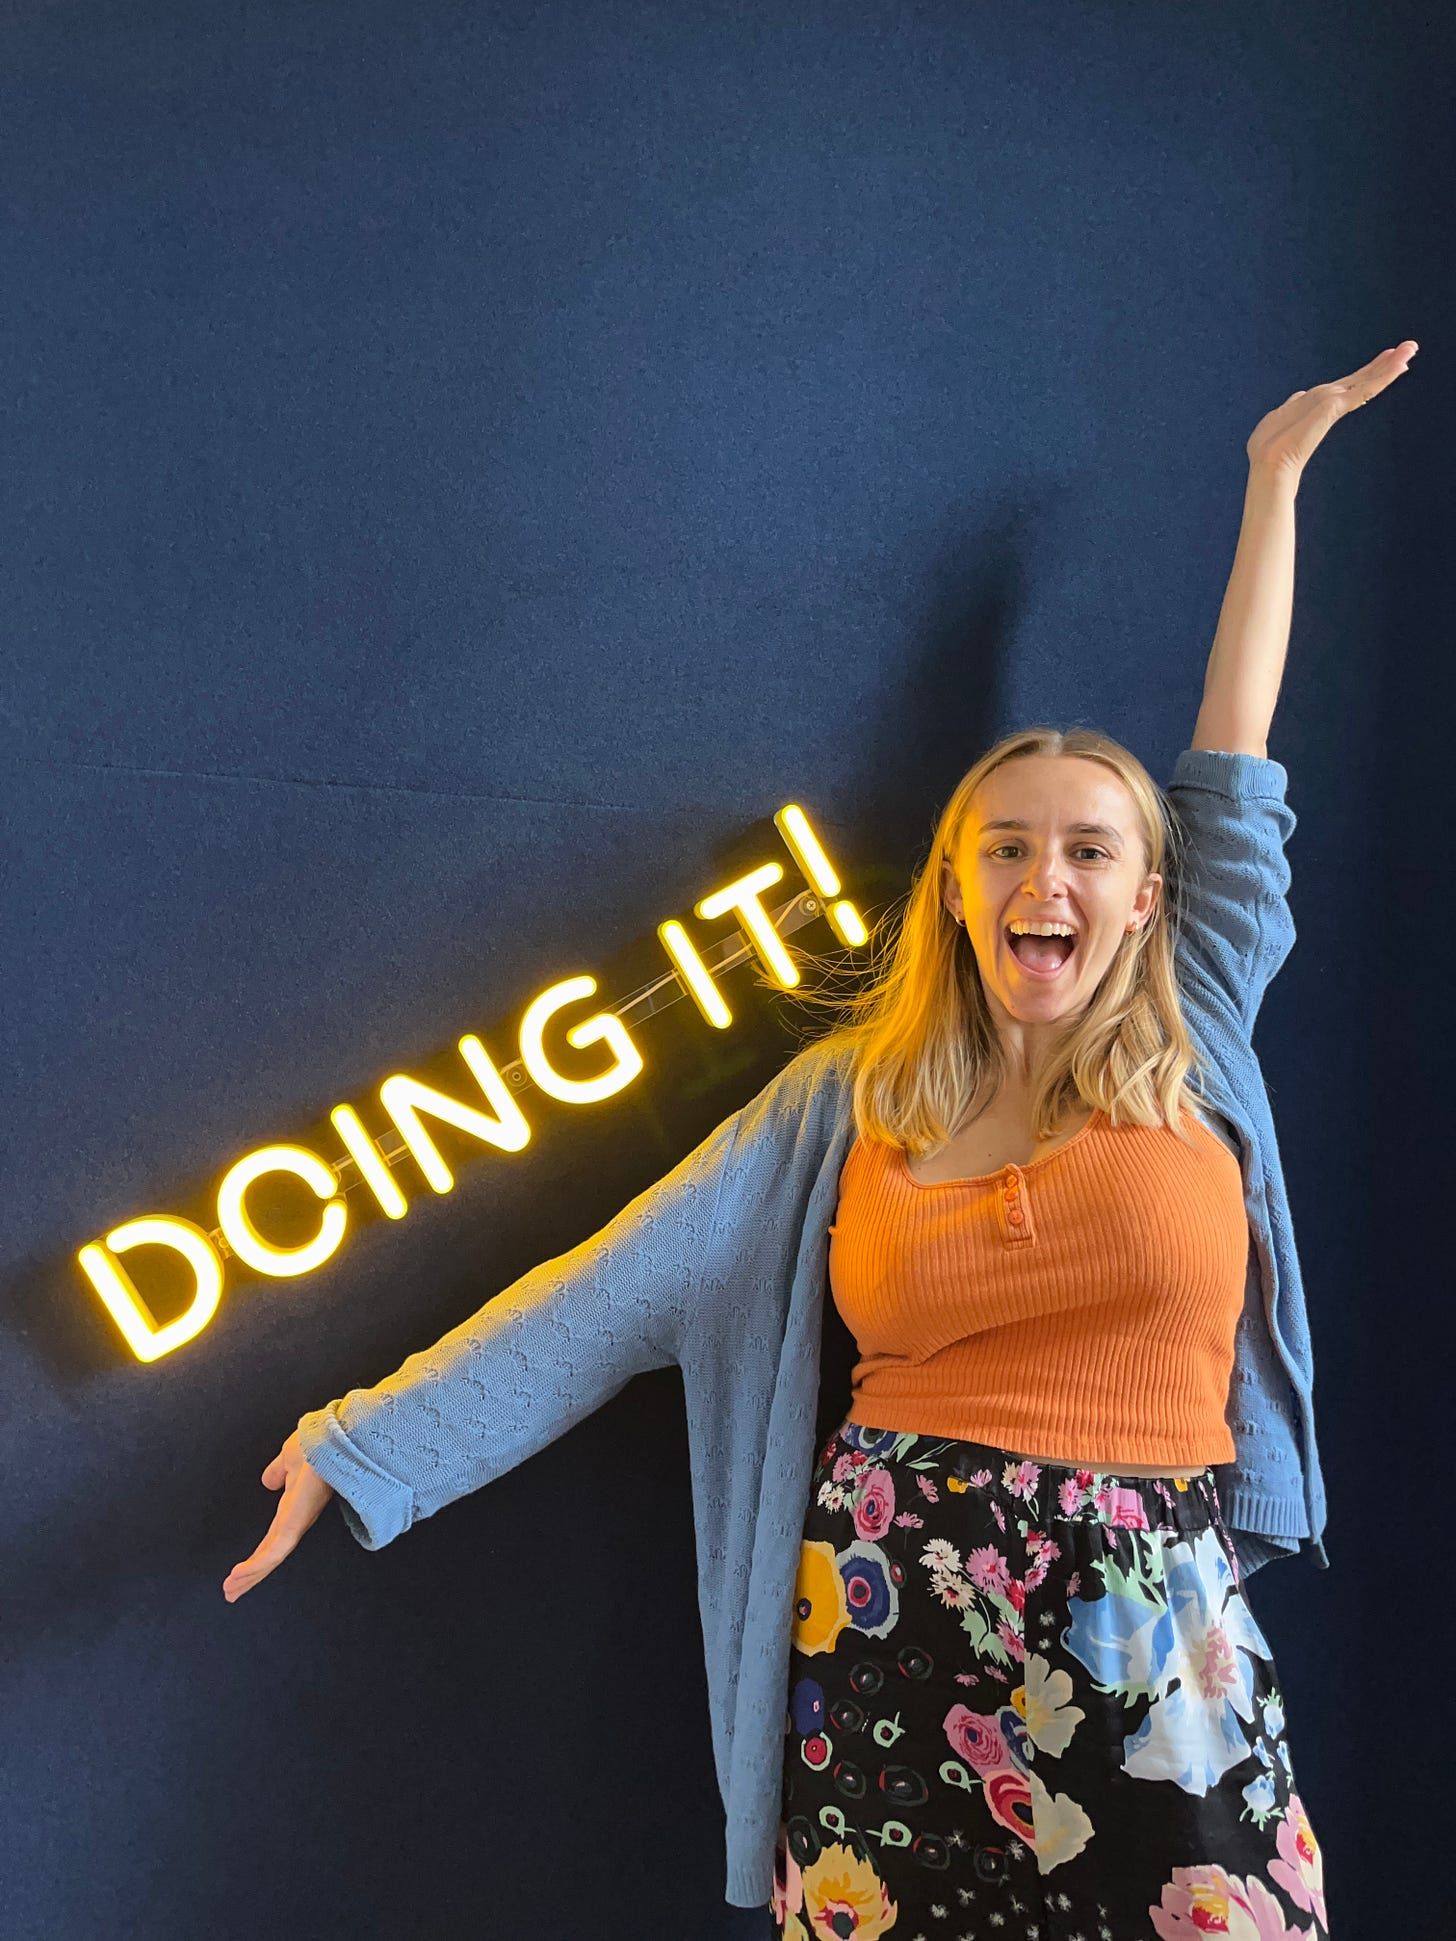 Hannah with her arms out in a "ta-da" pose next to the Doing It neon sign in the Doing It studio